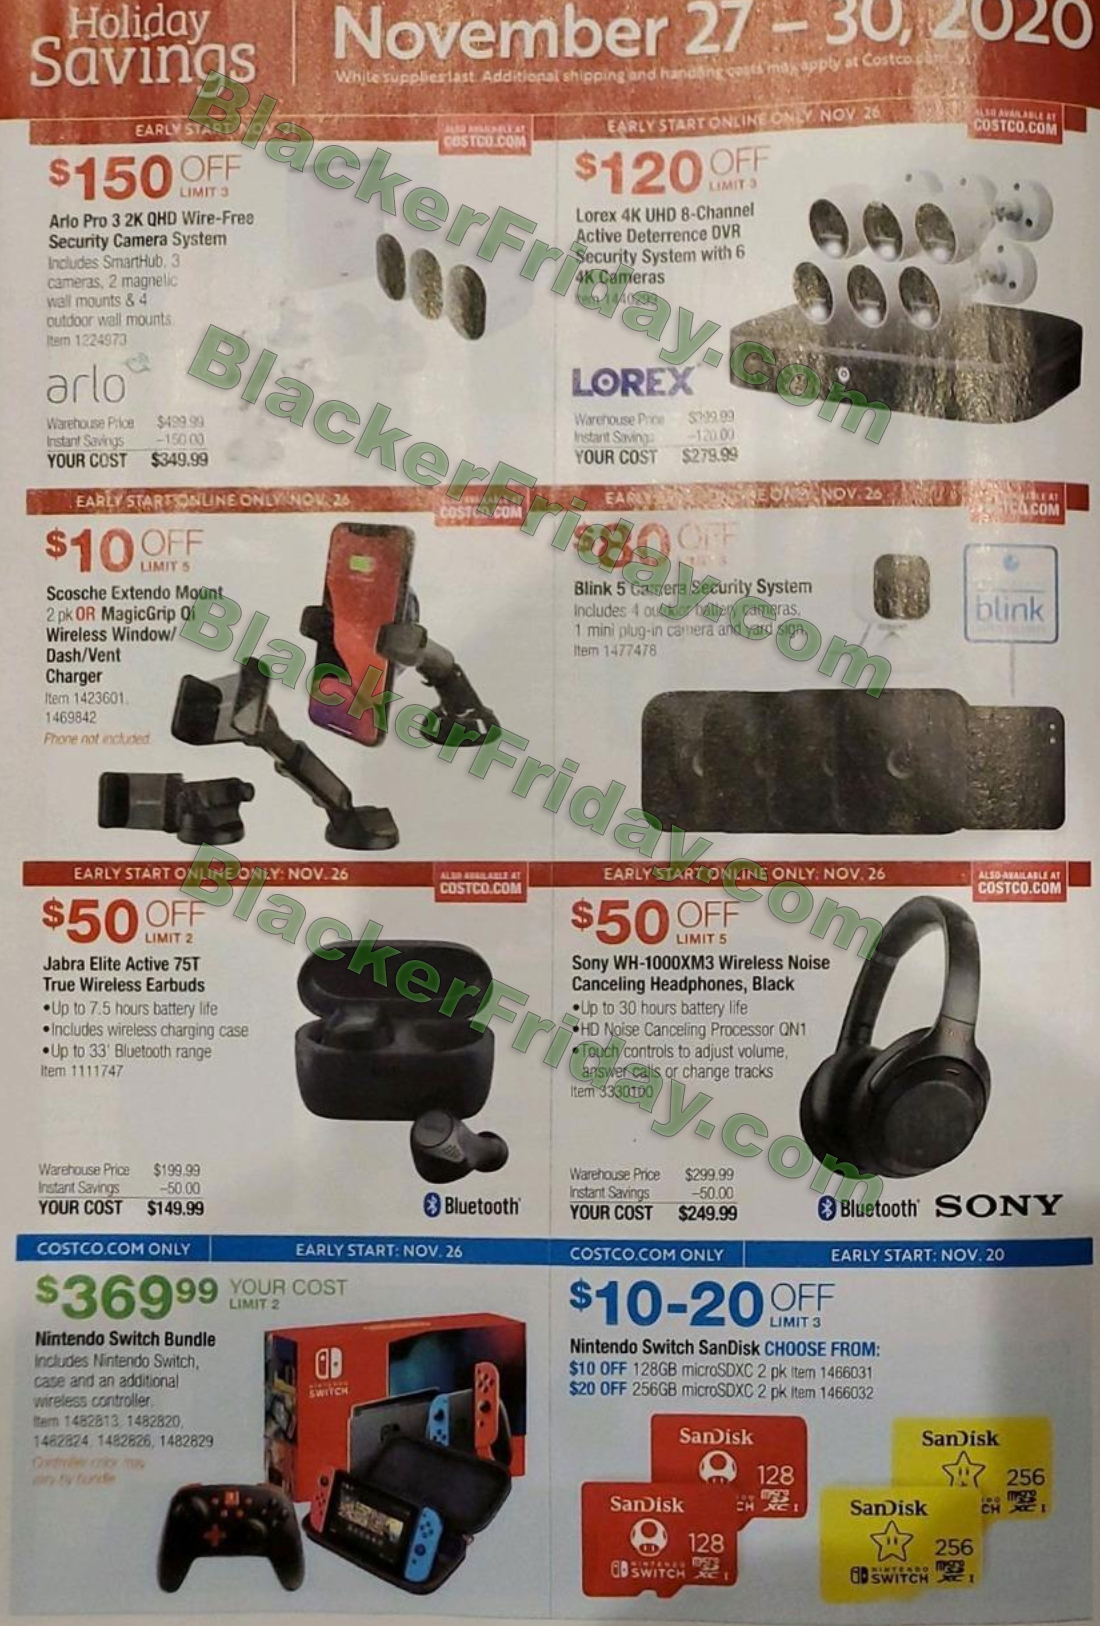 Costco Cyber Monday 2020 Sale - What to Expect - Blacker Friday